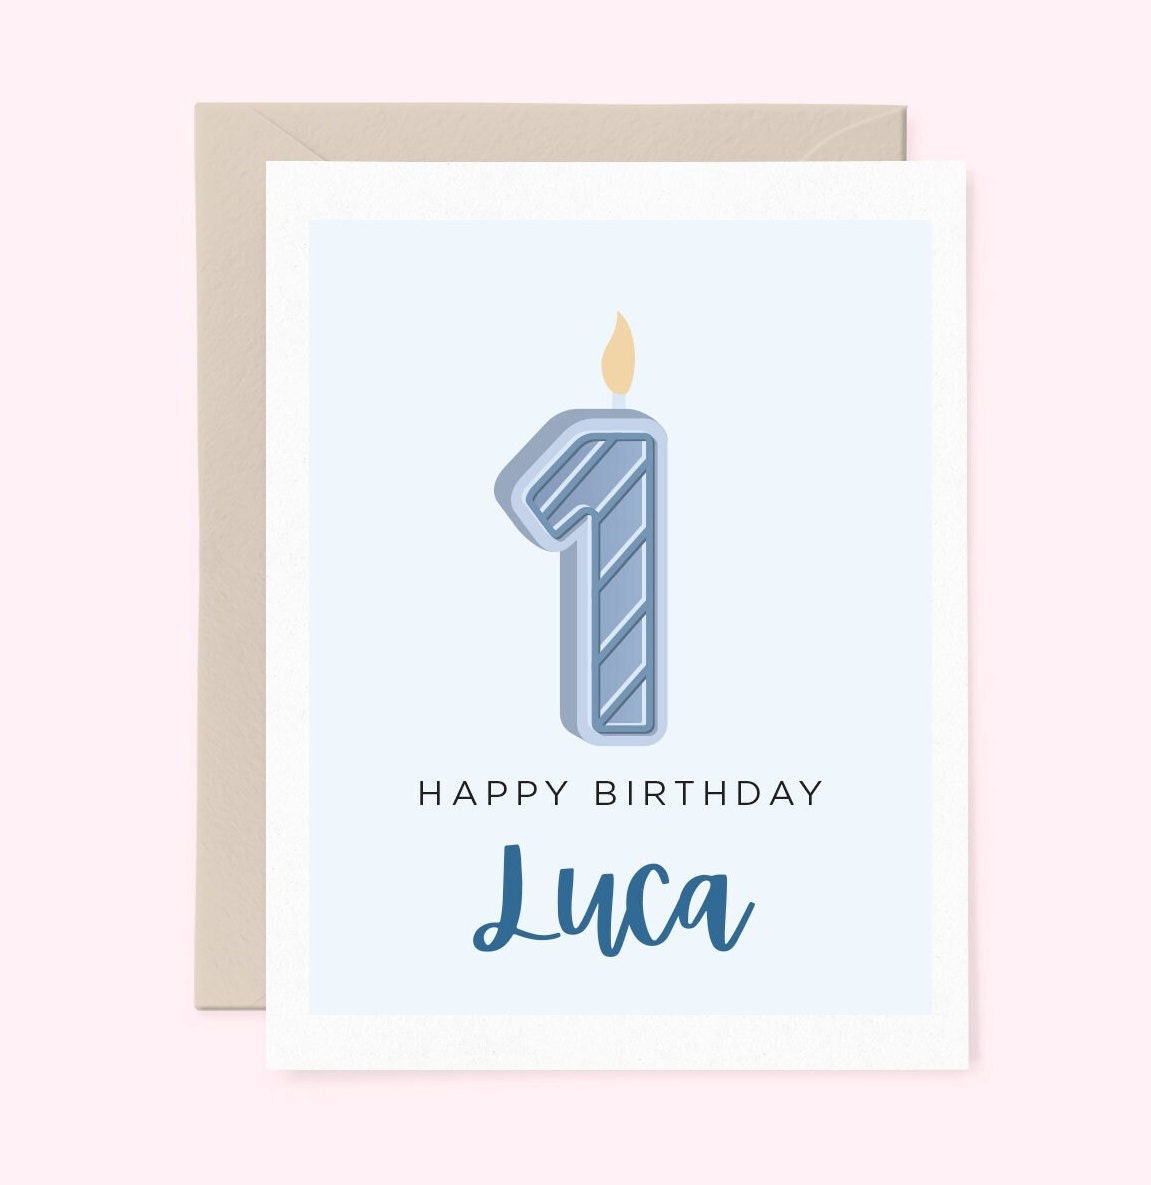 Personalized Birthday Card for Toddler or Baby, Childrens Card, Custom  Birthday Card, First Birthday Card, Cute Candle Card 0TLCC03 